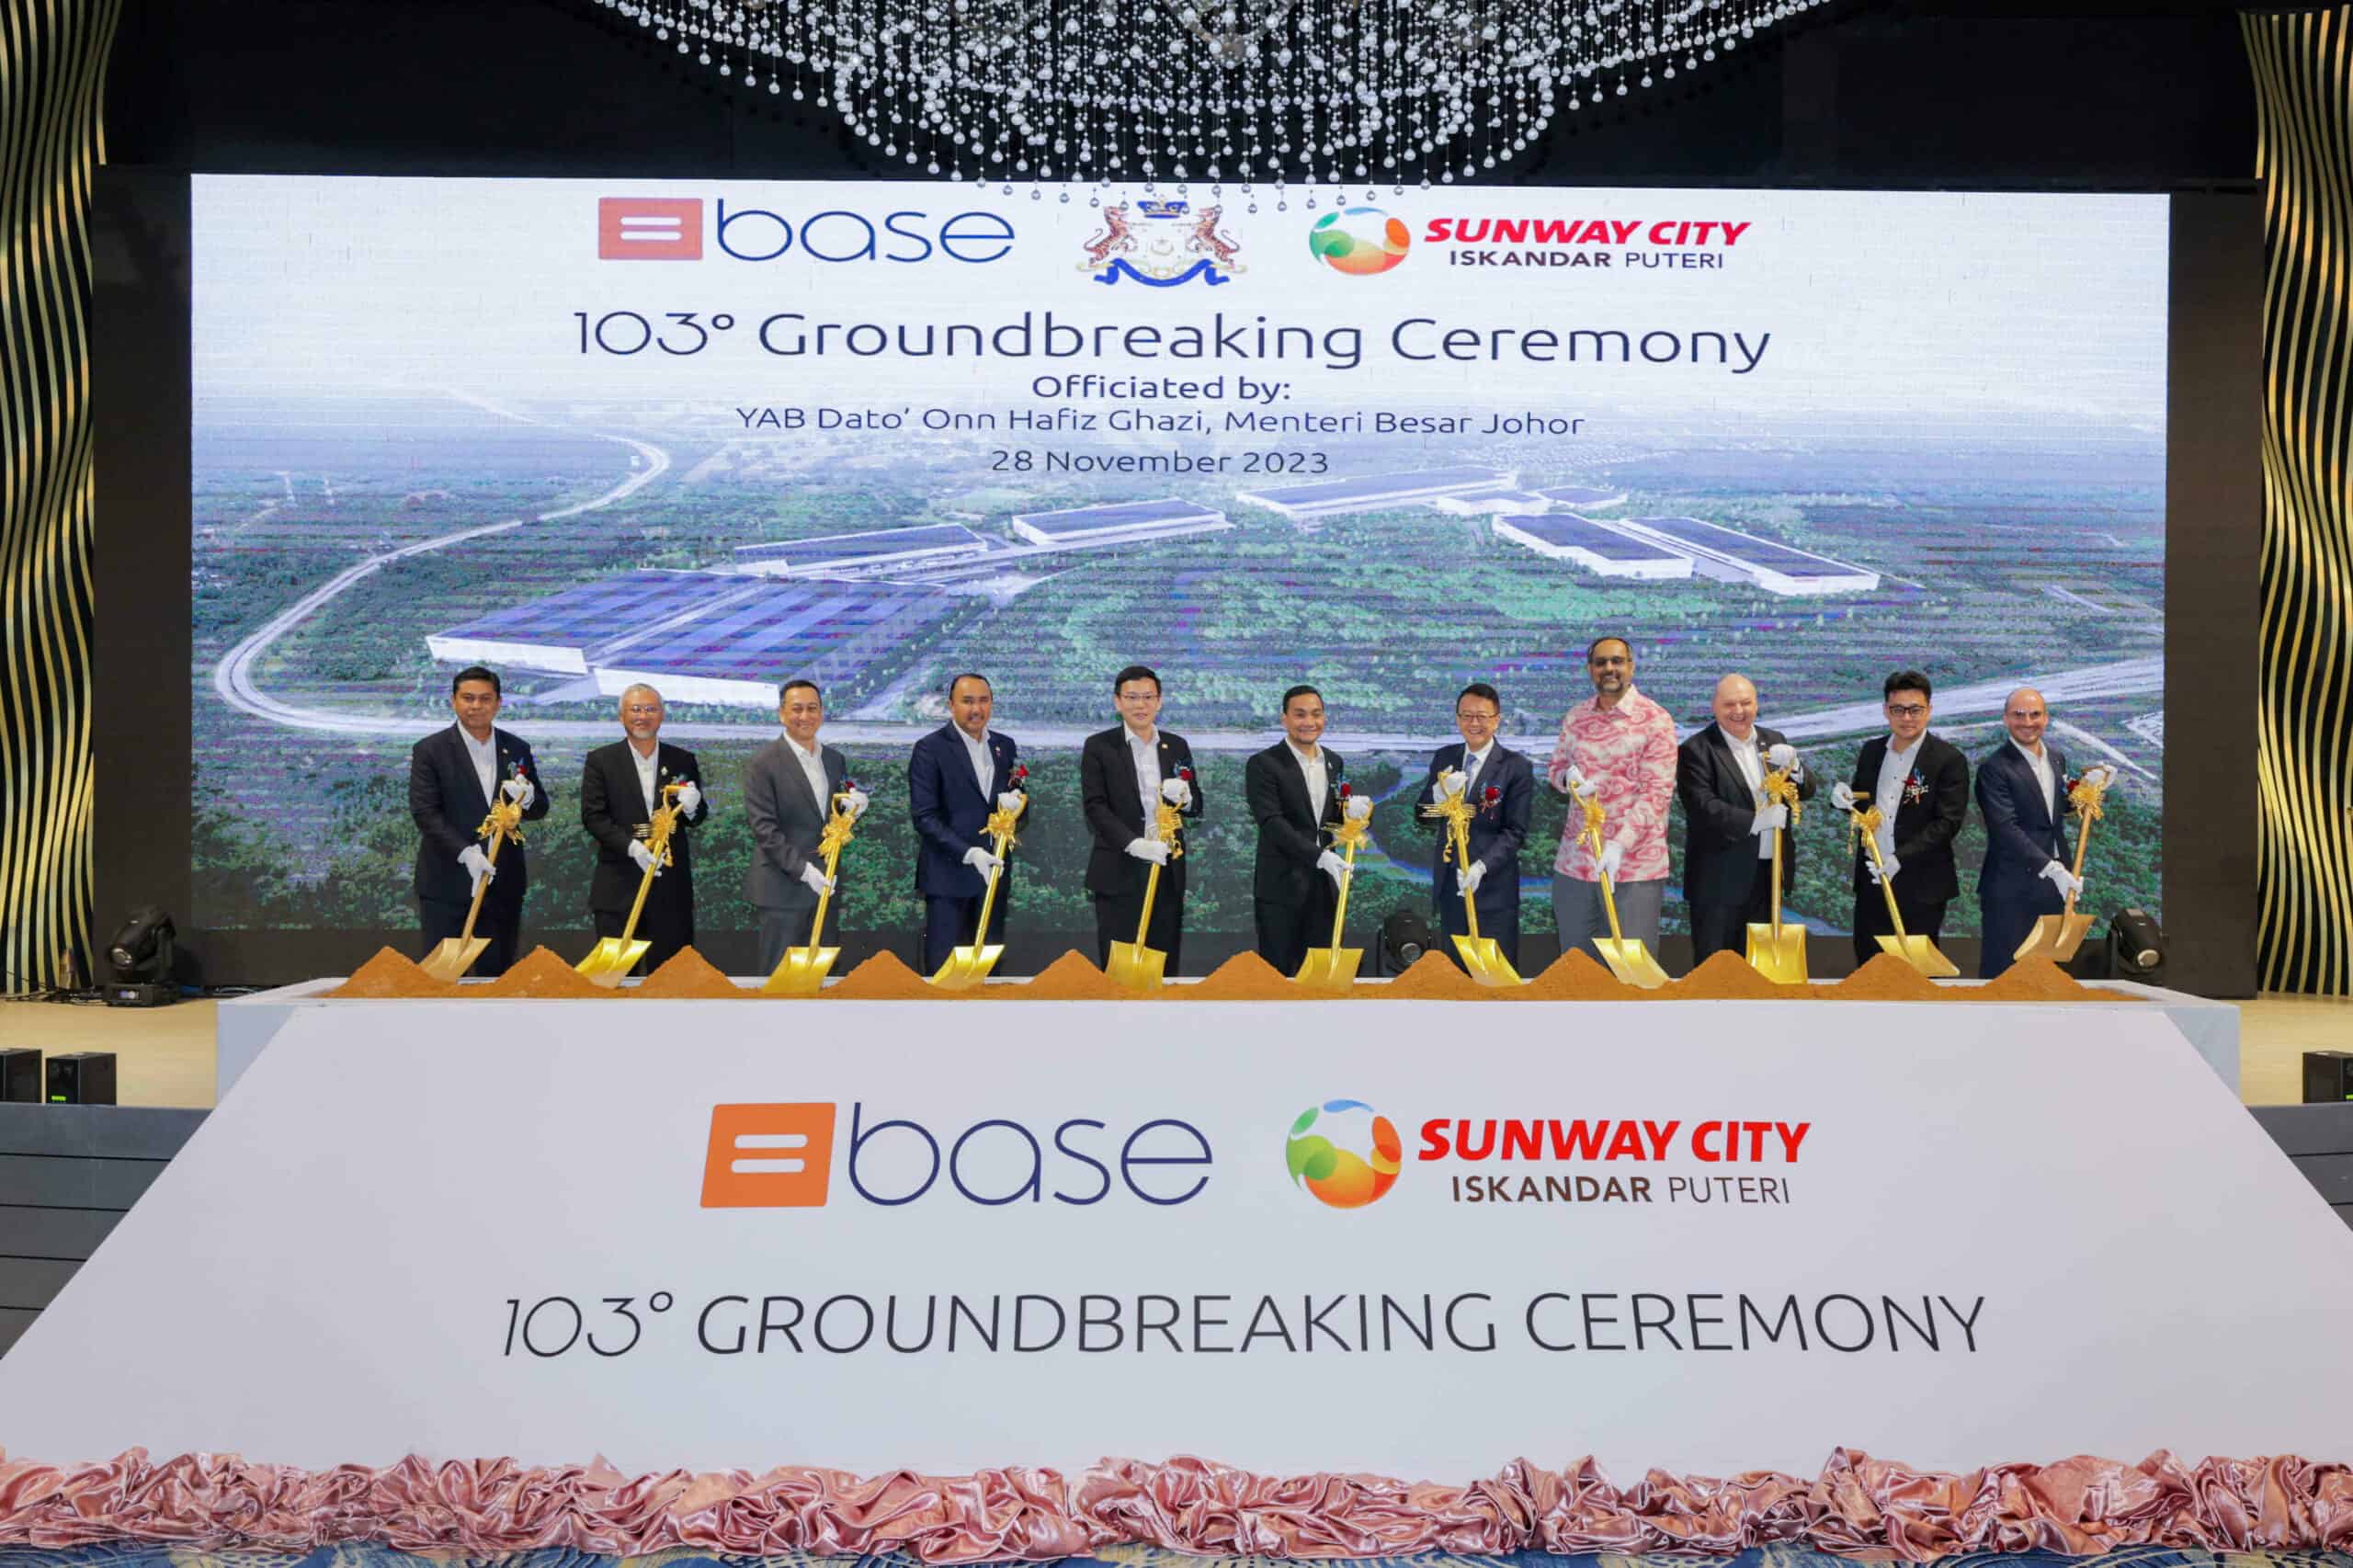 EQUALBASE AND SUNWAY BREAK GROUND FOR RM 8 BILLION CARBON NEUTRAL FREE COMMERCIAL ZONE IN SUNWAY CITY ISKANDAR PUTERI